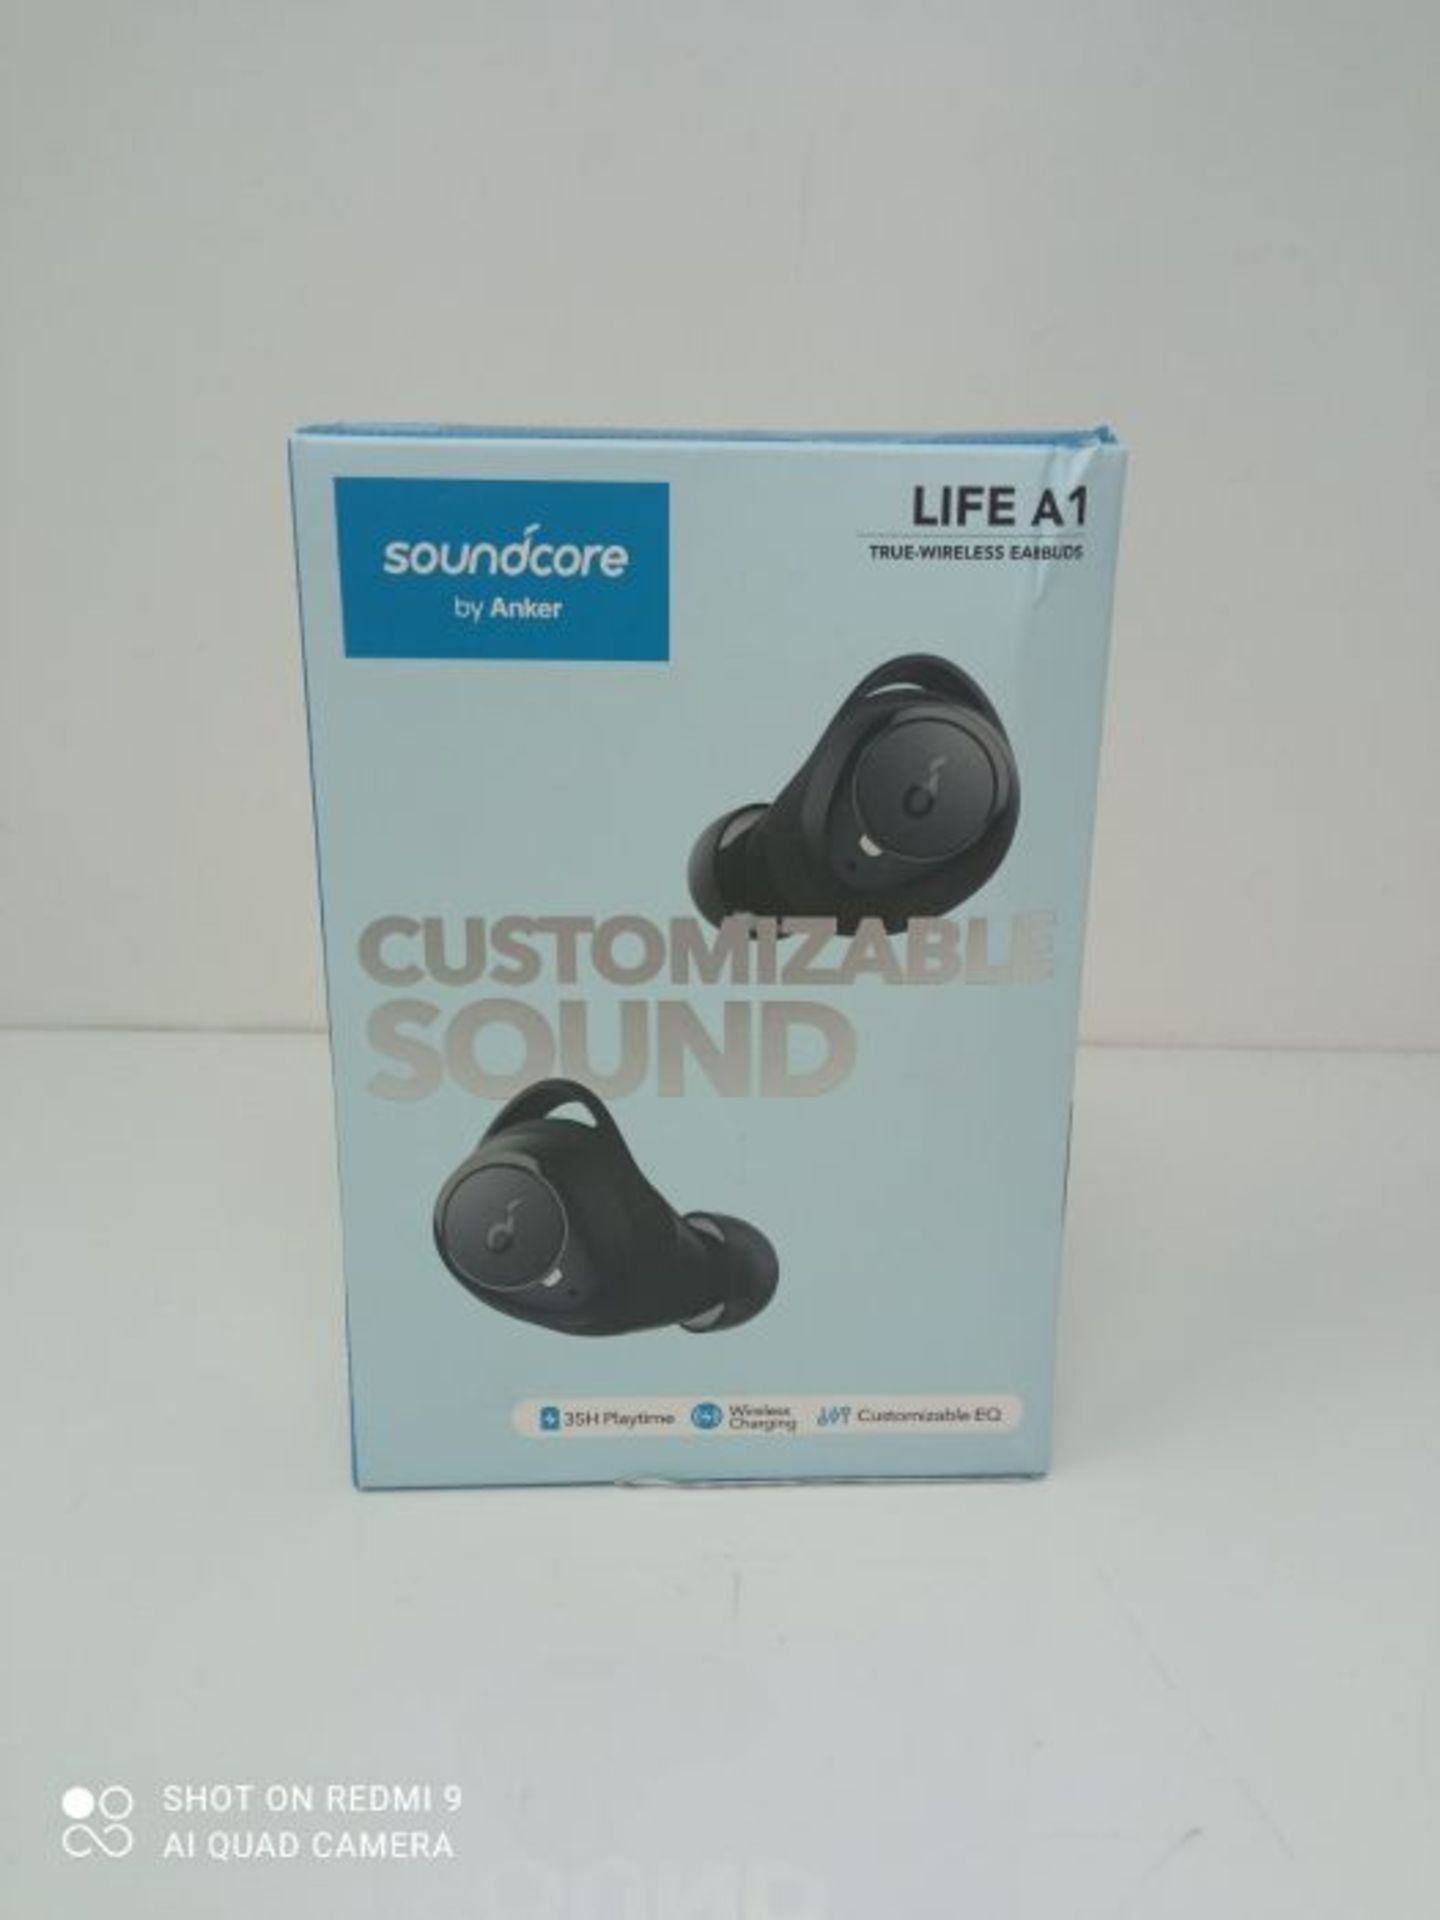 Wireless Earbuds, Soundcore by Anker Life A1 Bluetooth Earbuds, Powerful Customized So - Image 2 of 3